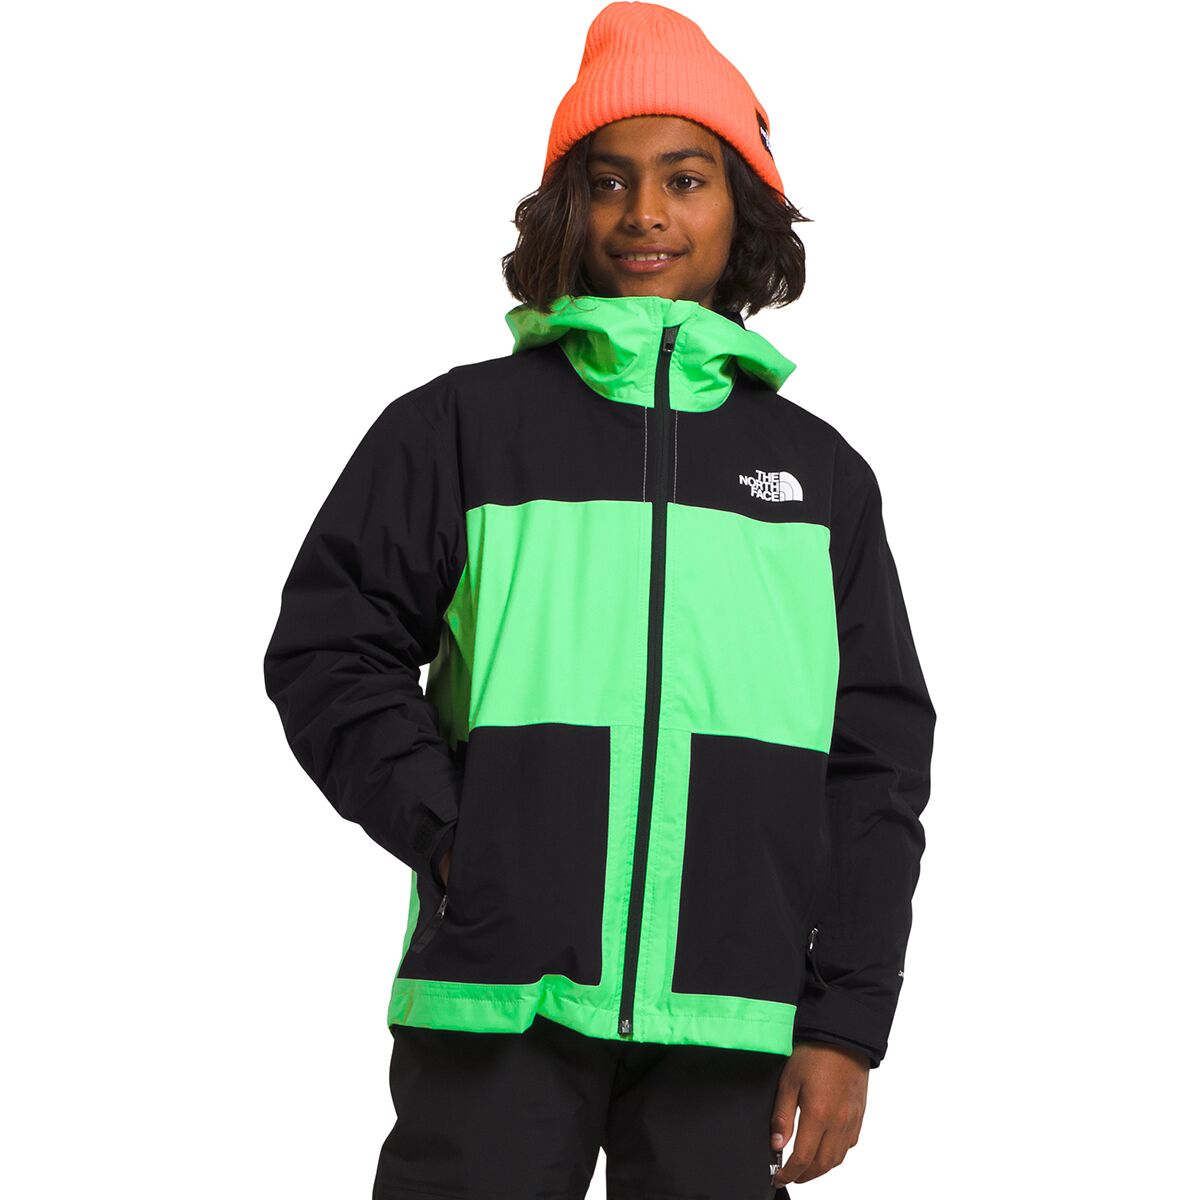 The North Face Freedom Triclimate Jacket - Boys